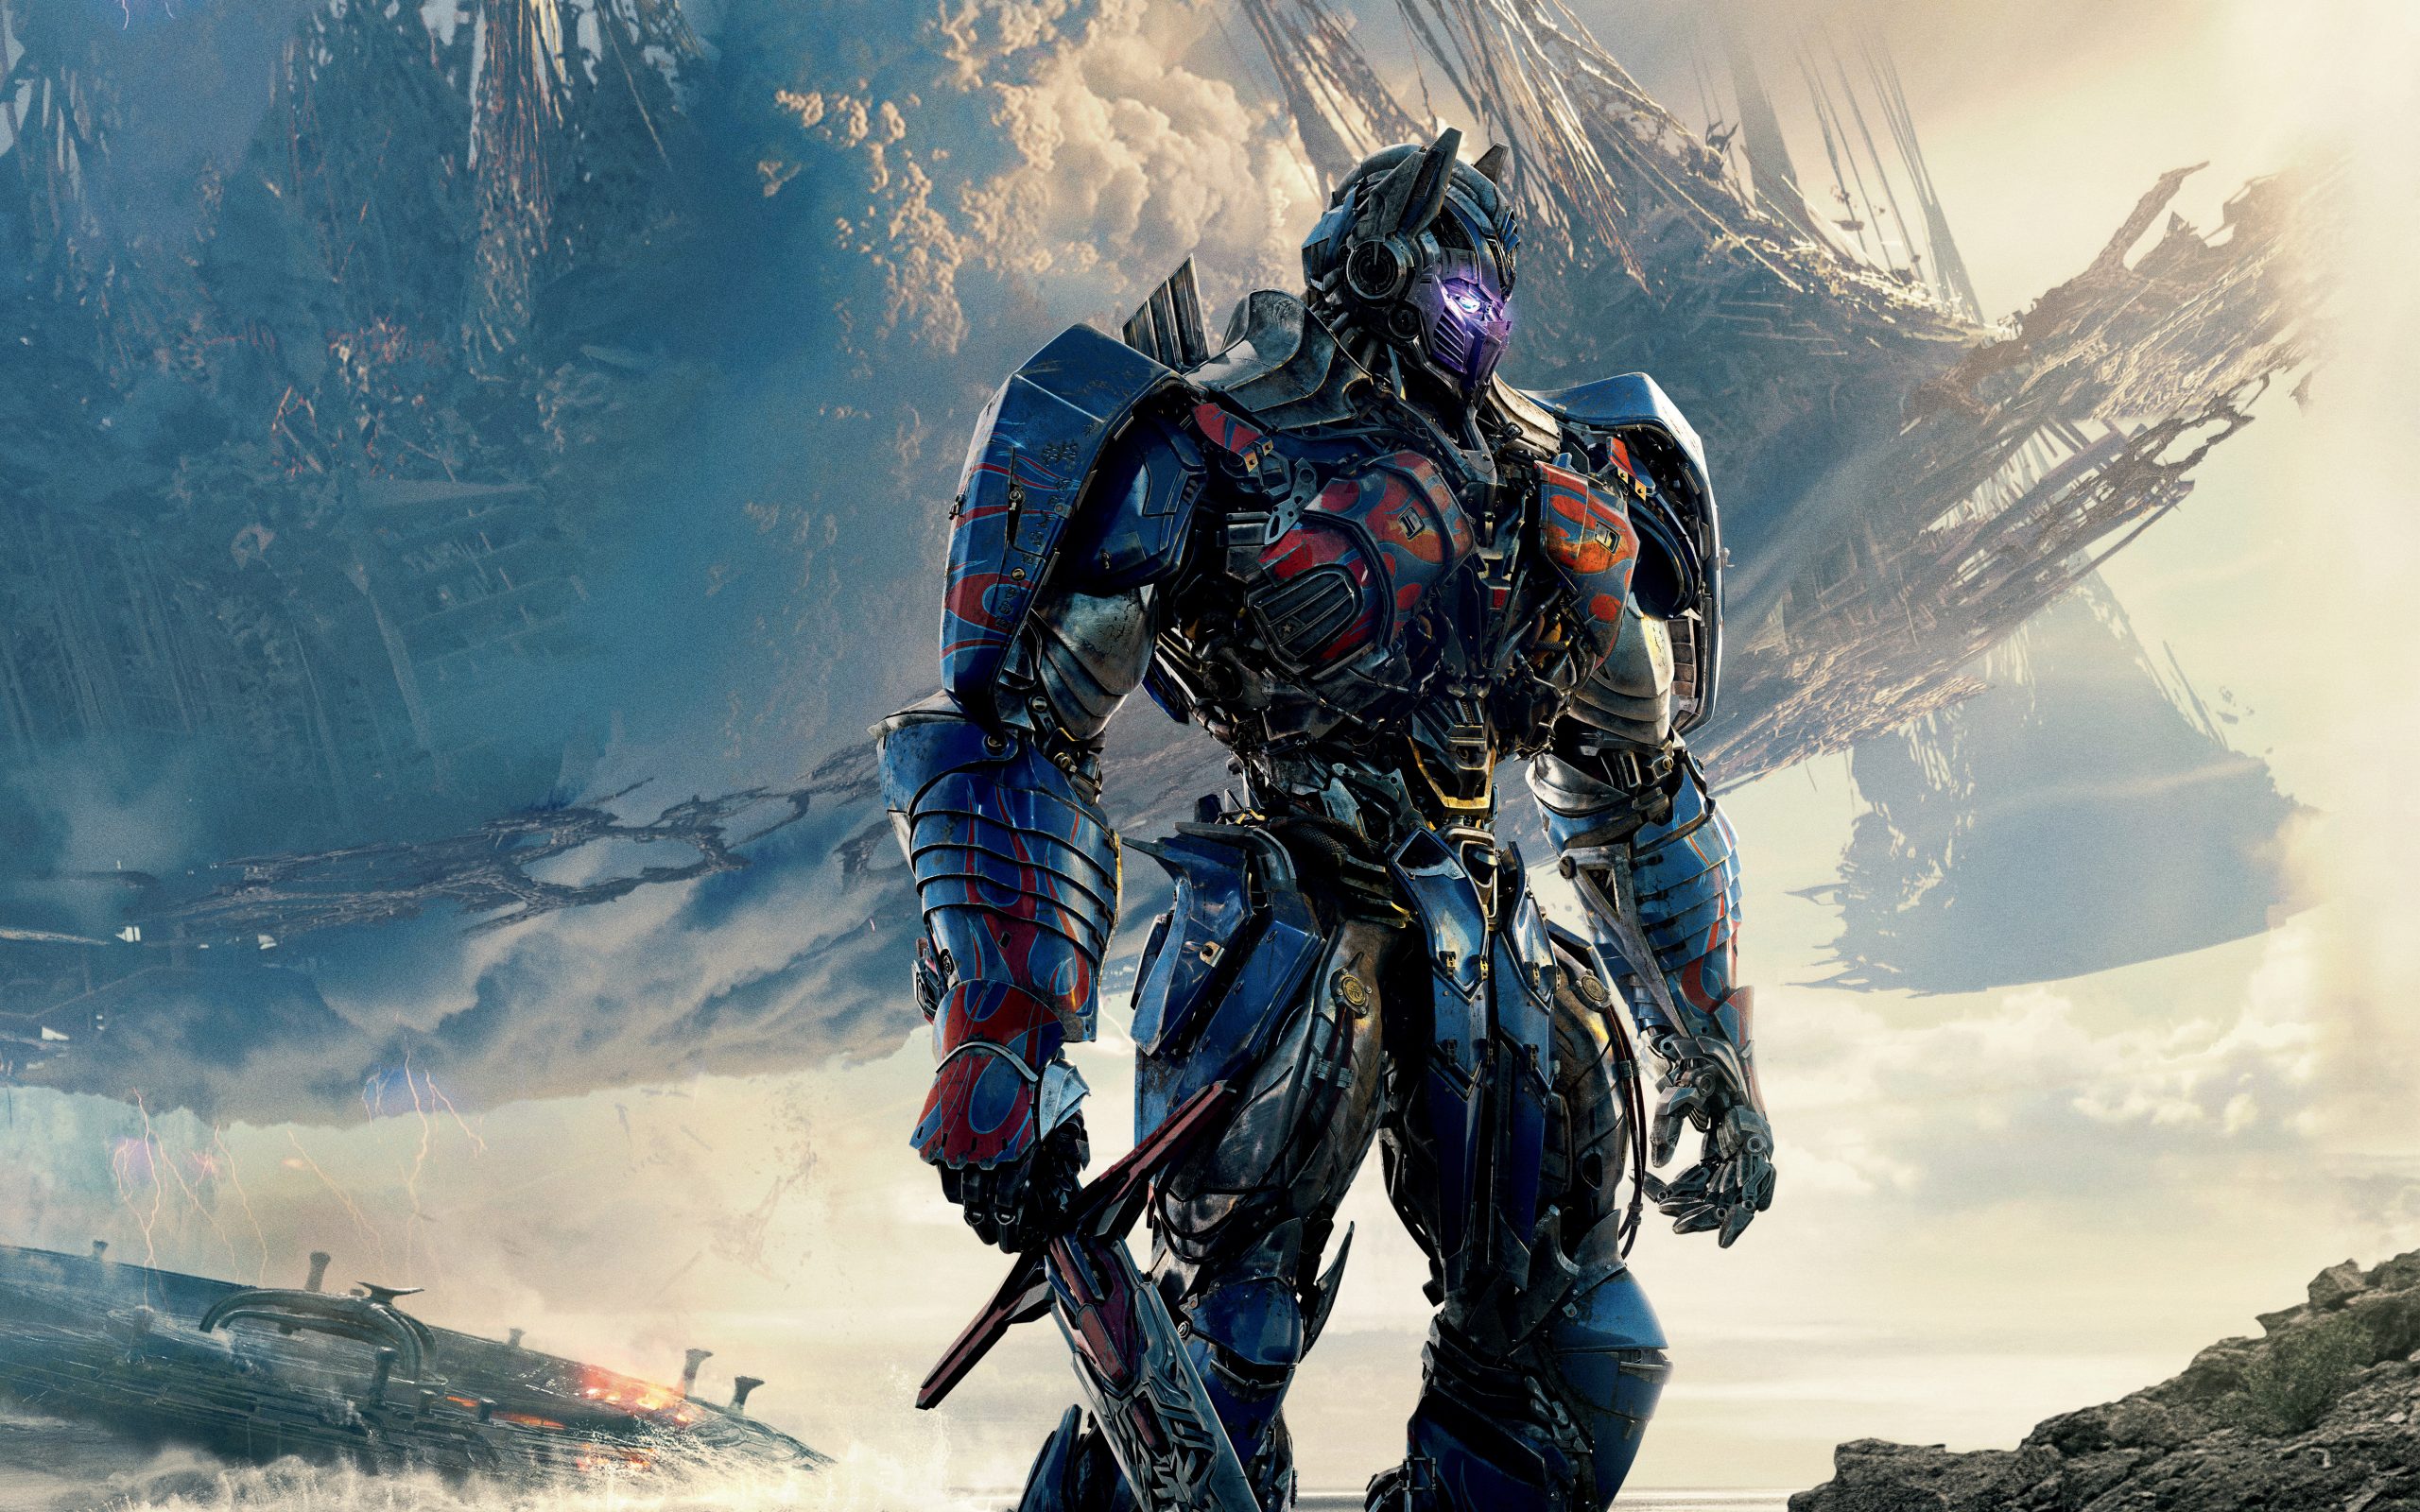 Michael Bay also directed the poorly received movie Transformers: The Last Knight (2017).